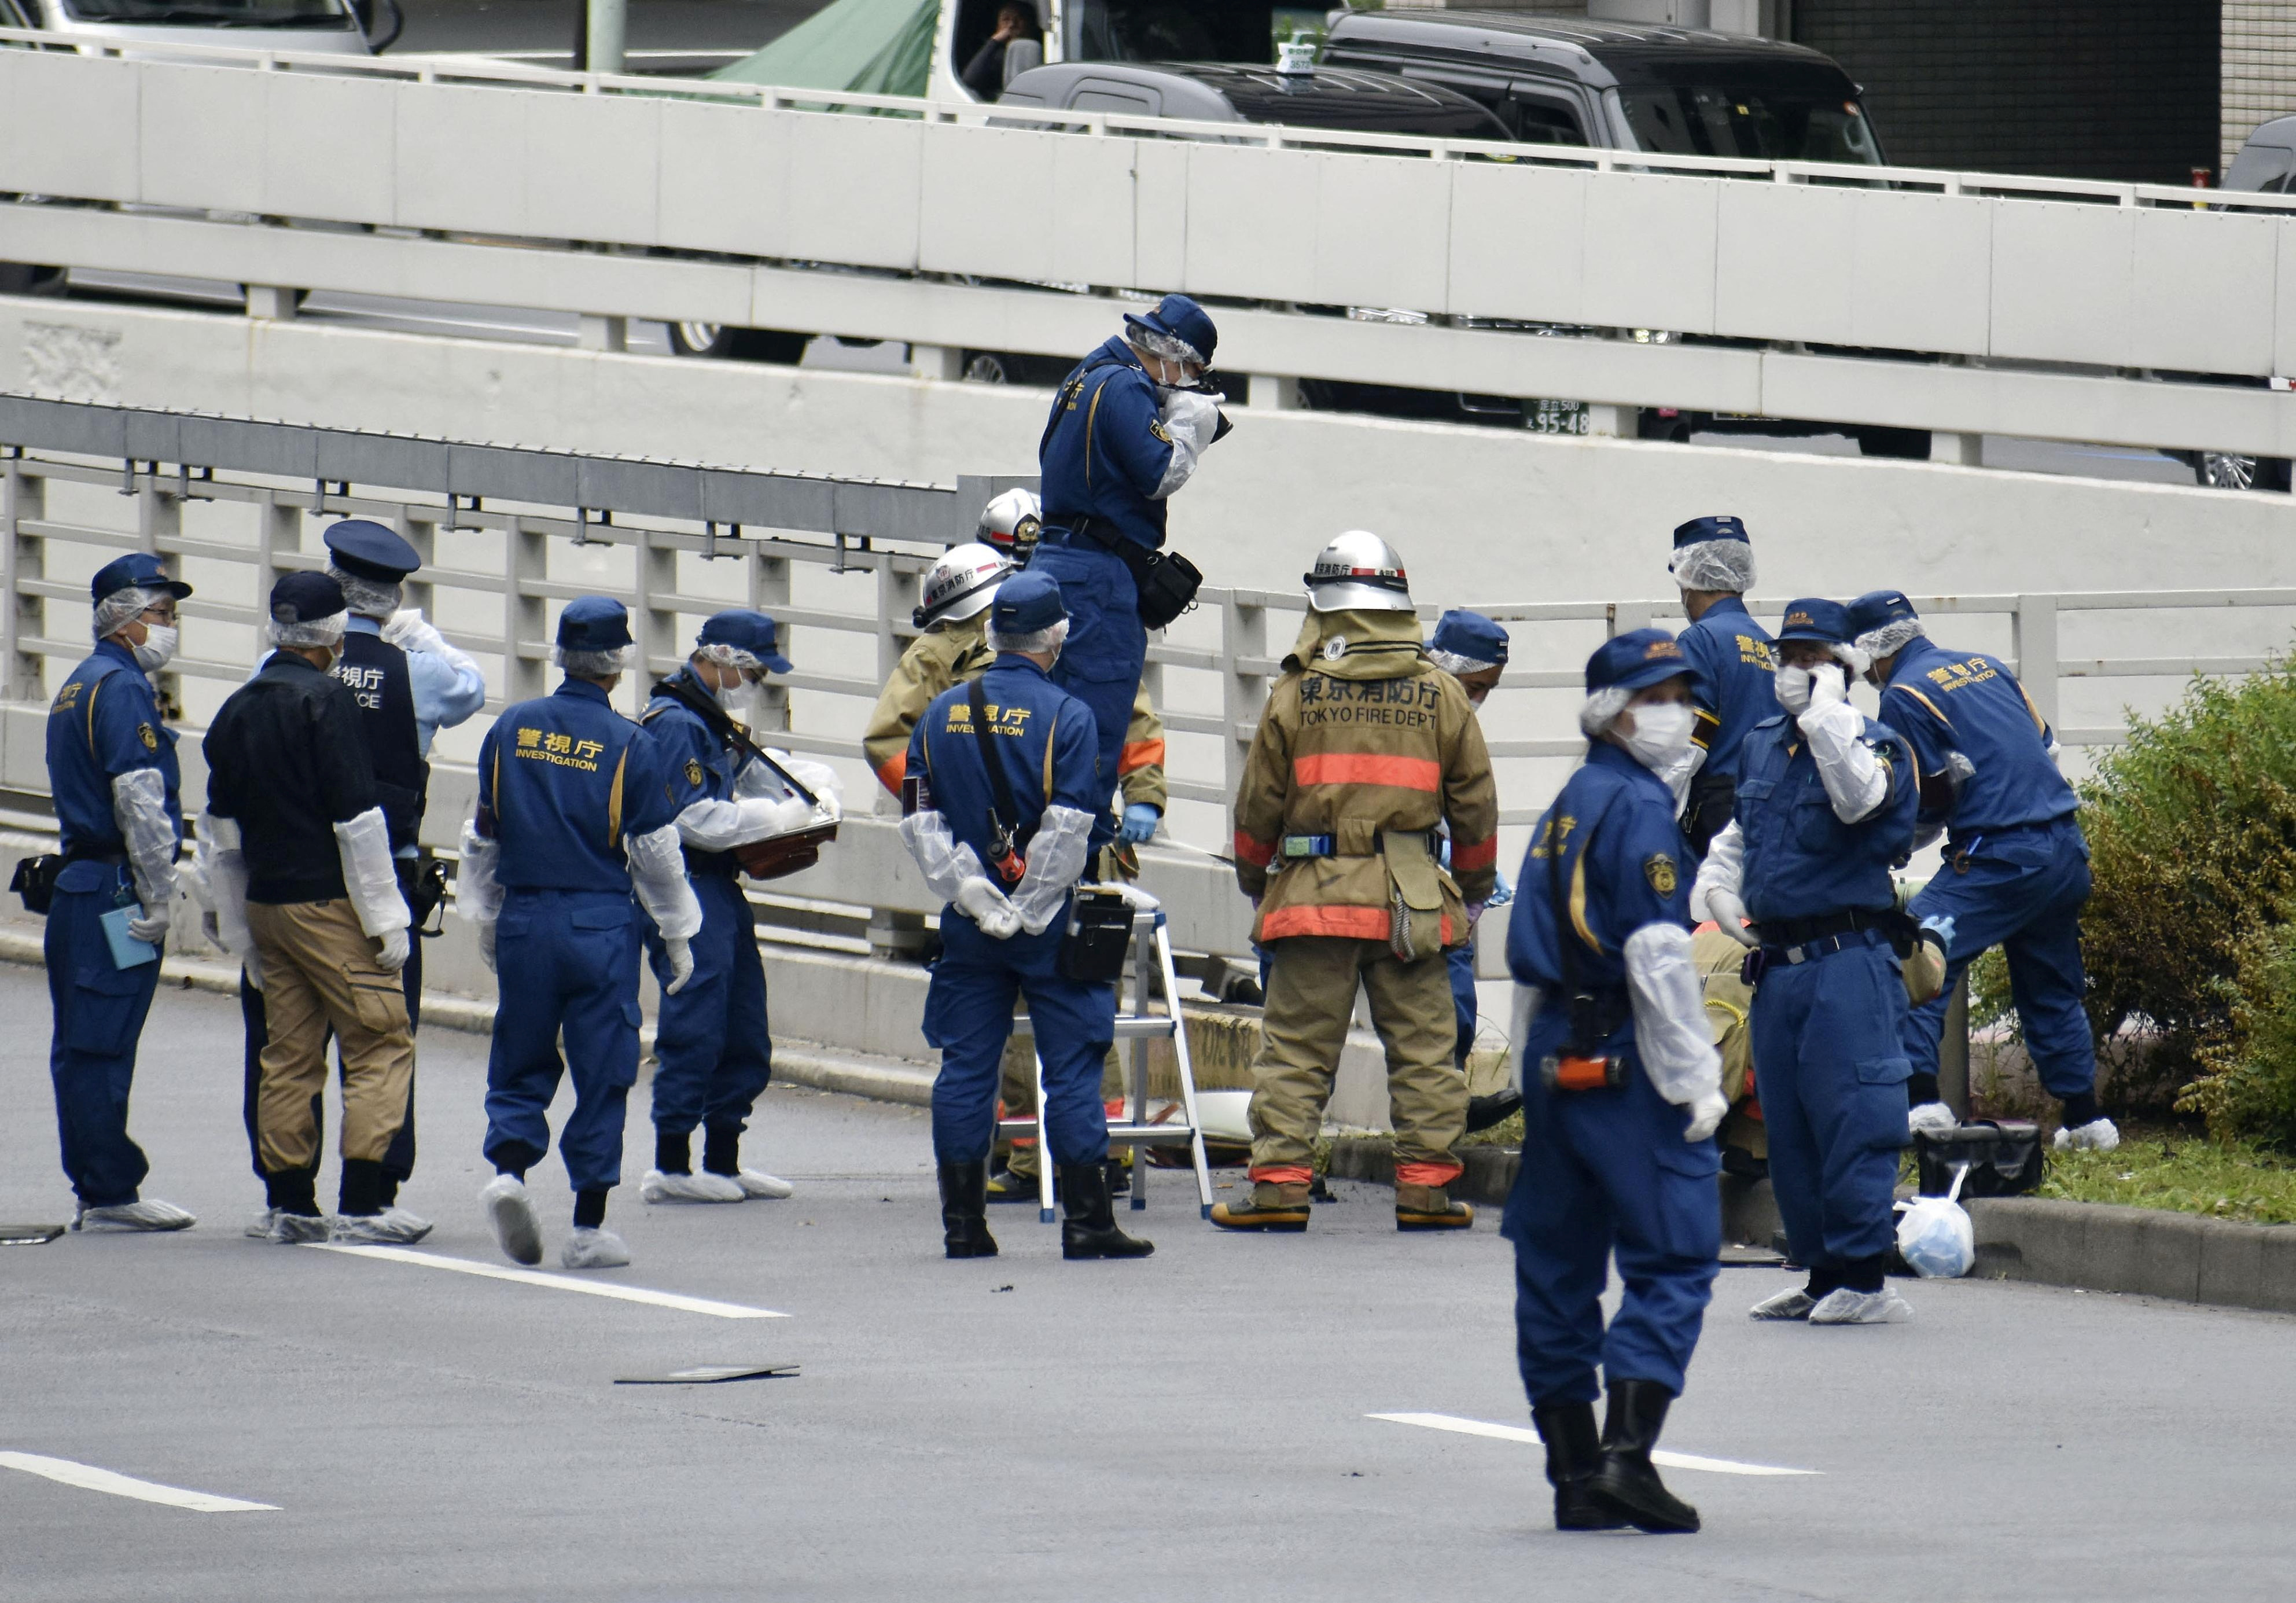 Japanese man sets himself on fire in apparent protest at former PM’s state funeral